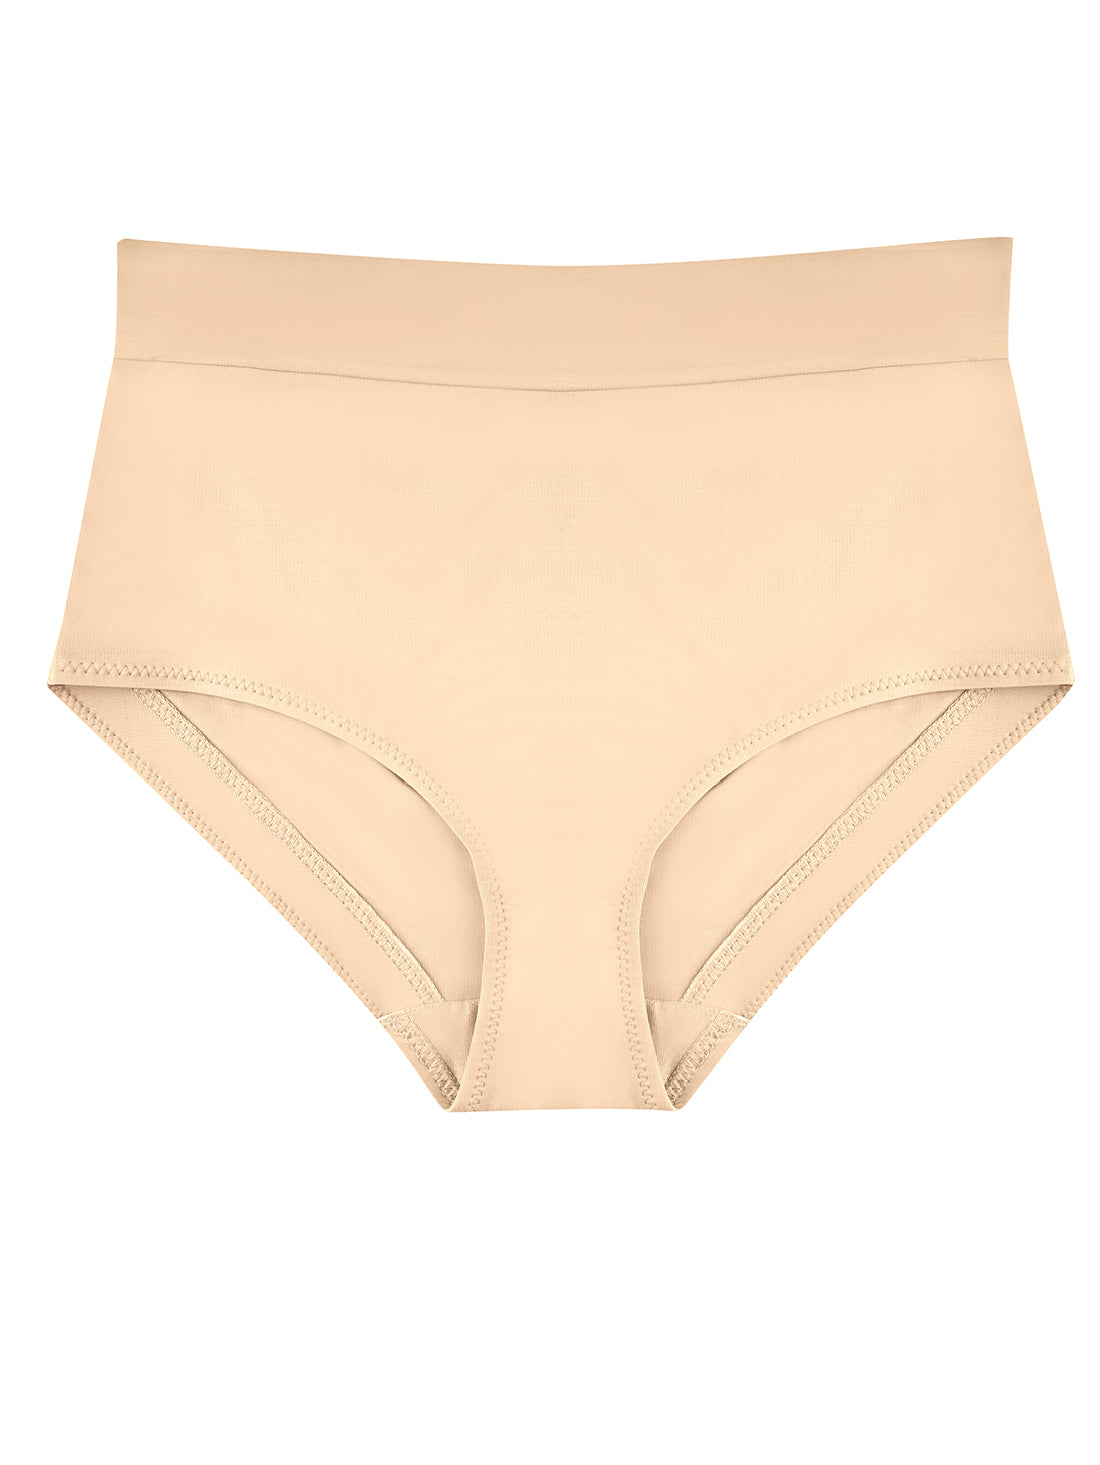 LAILAIJU Ladies Nylon Panties with Cotton Crotch Waist Of Pure Cotton Underwear  Women Contracted Comfortable (Beige, M) at  Women's Clothing store